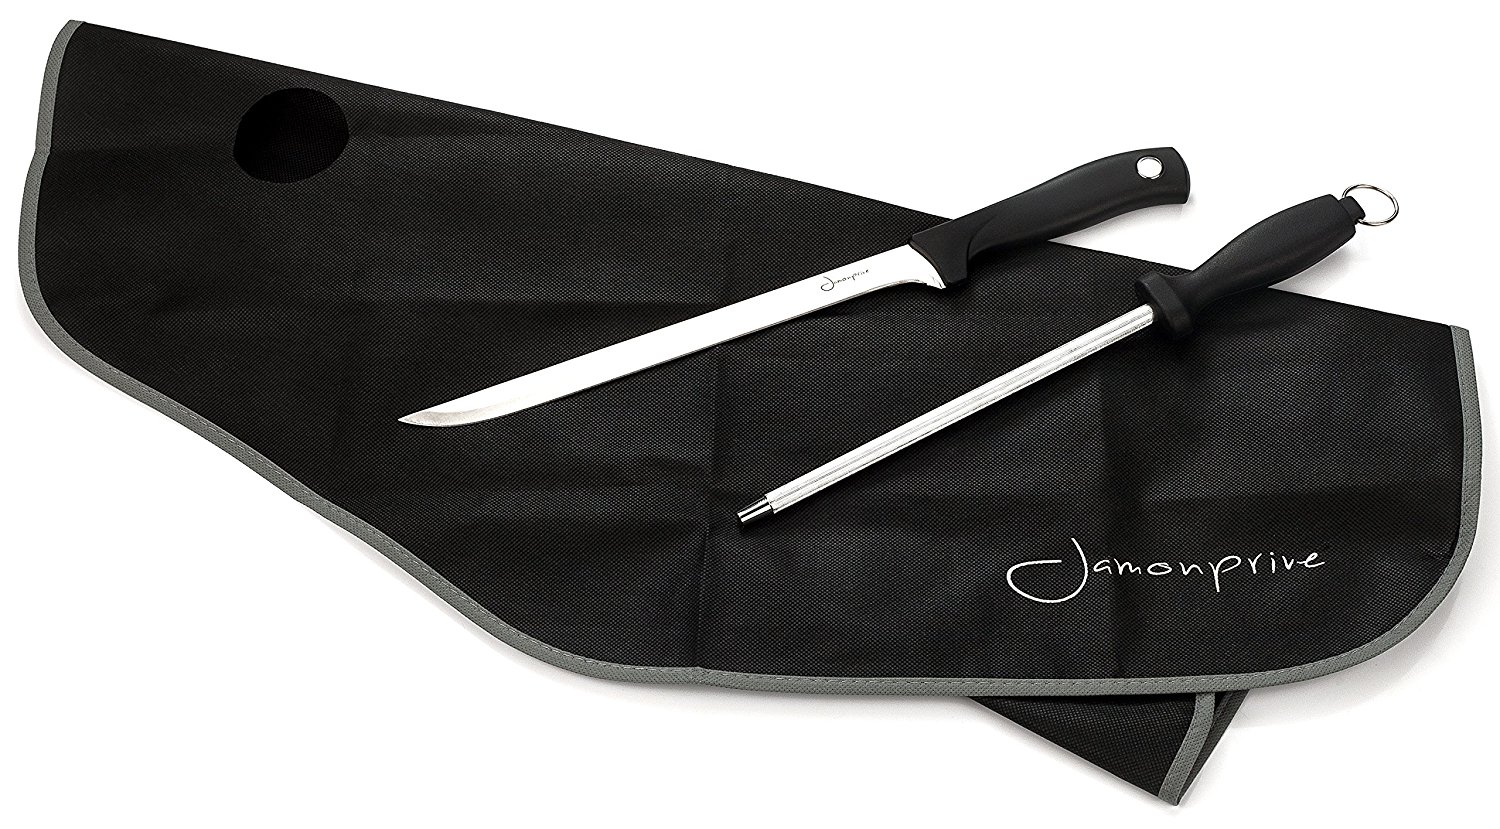 Jamón Carving Knife Set with Carrying Case - Jamon